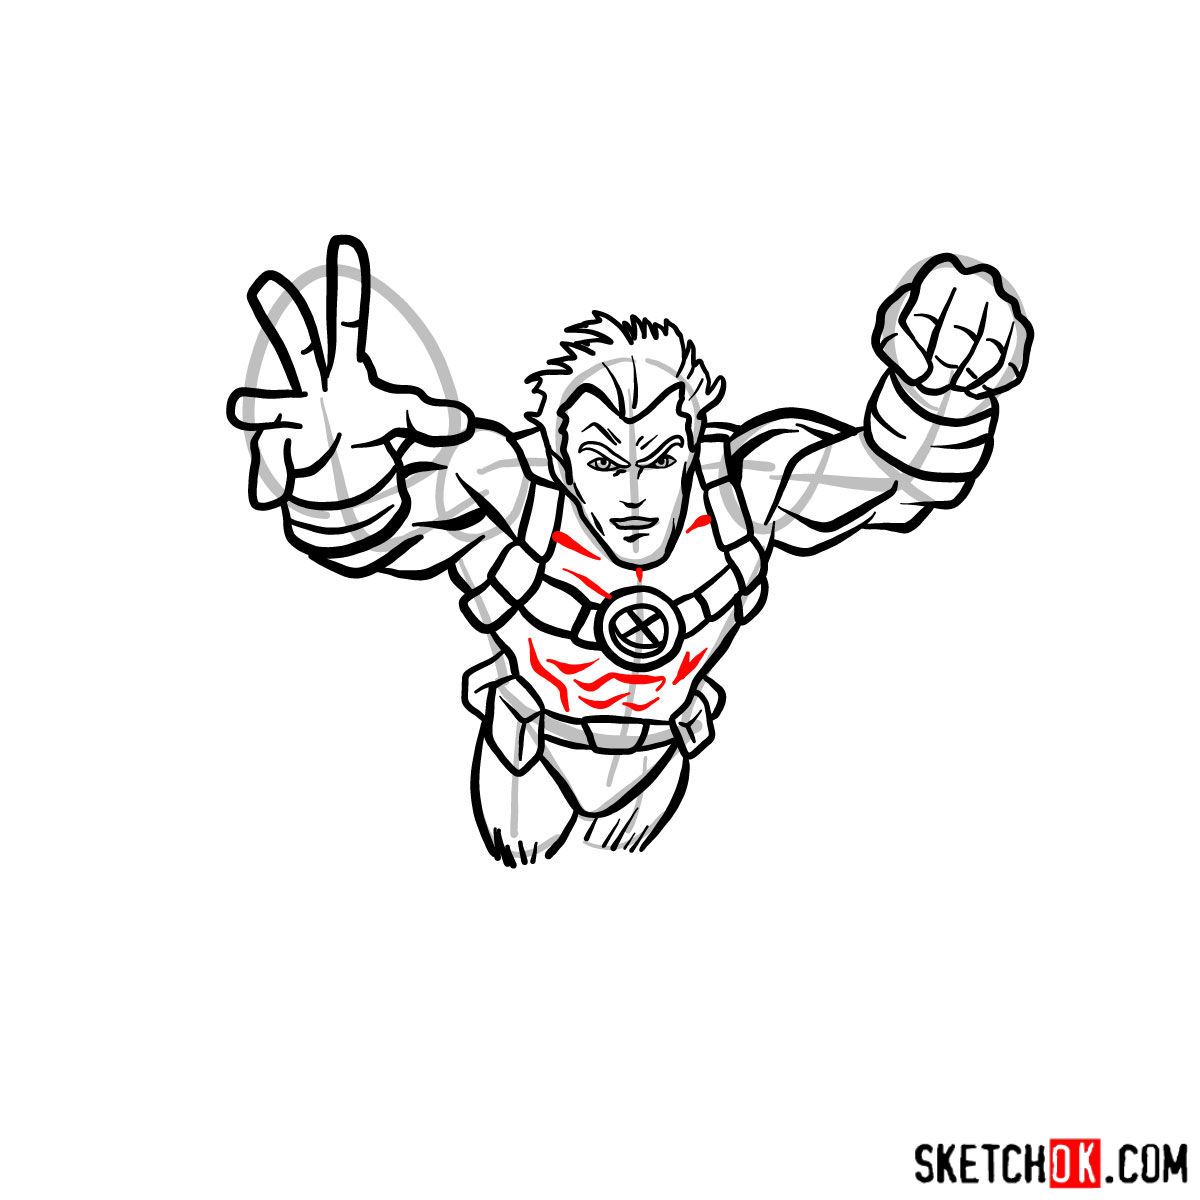 How to draw Cannonball, a mutant from X-Men series - step 10